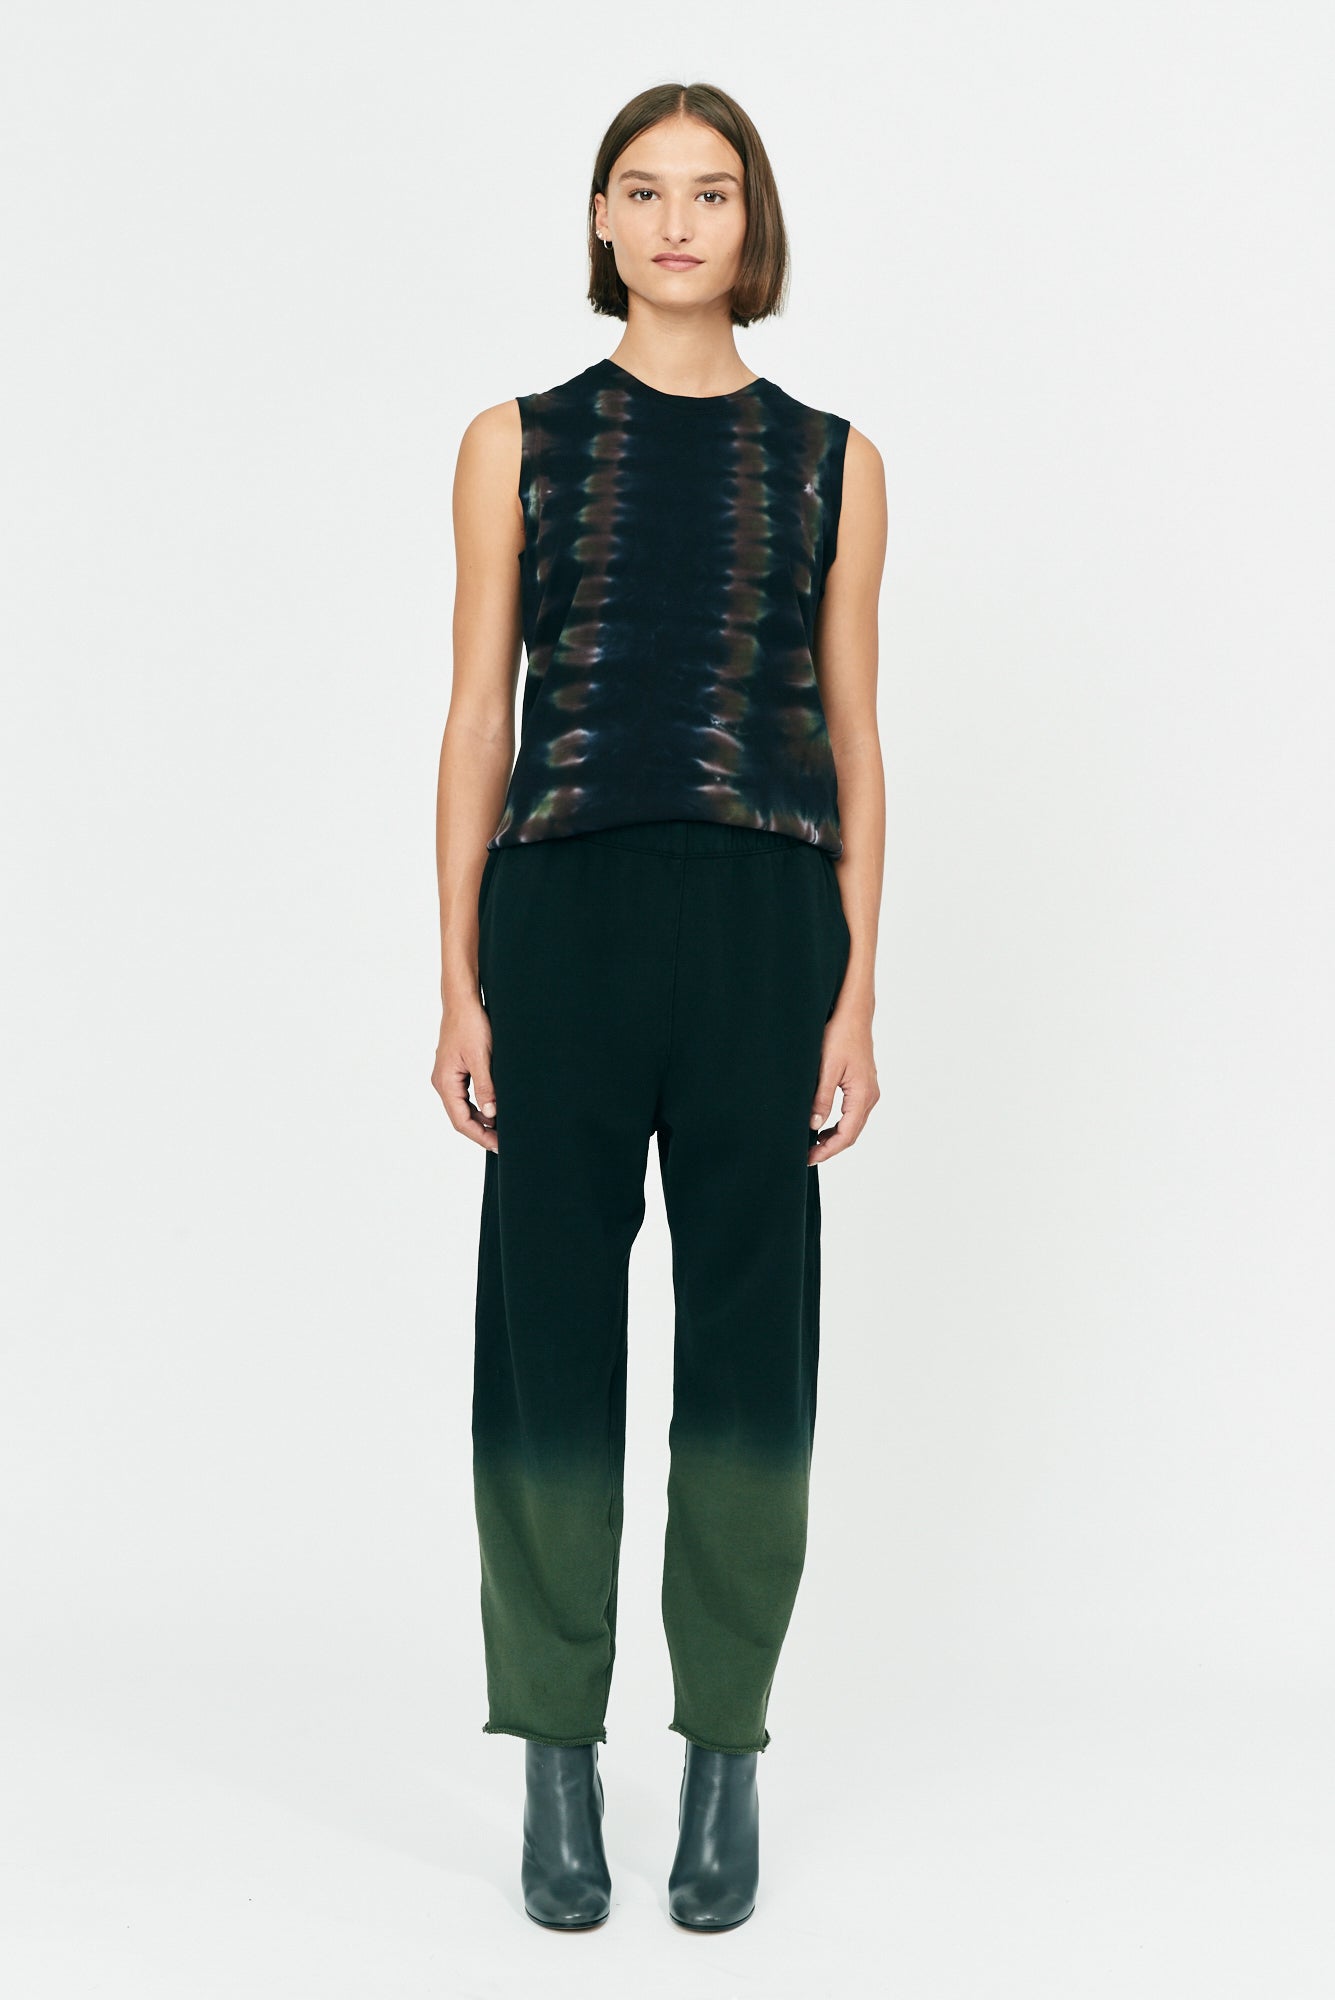 Forest Gradient Reflective Pond and Jersey Ankle Pant Full Front View